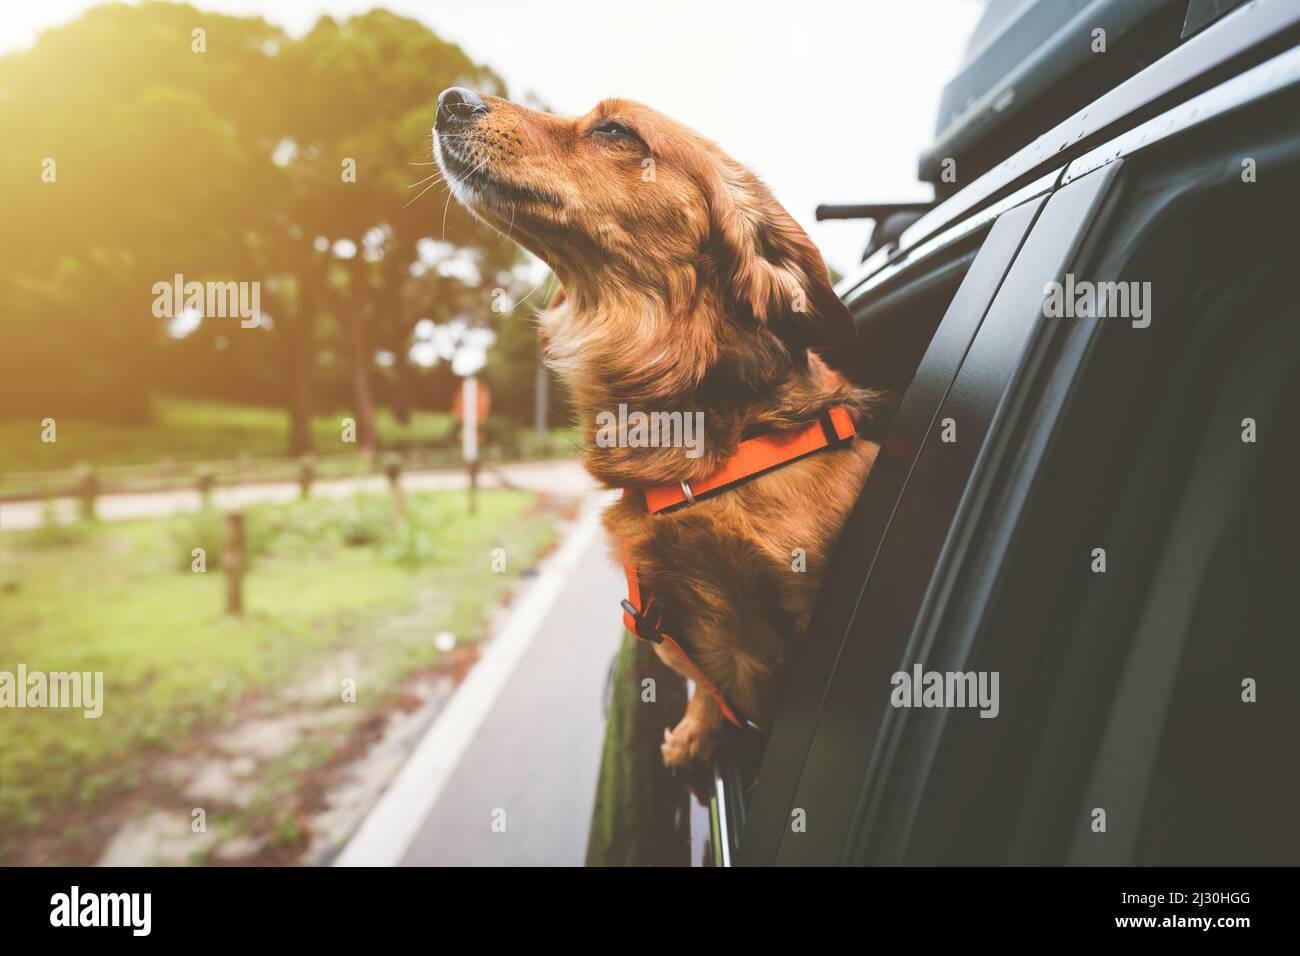 Dachshund dog riding in car and looking out from car window. Happy dog enjoying life. Dog road trip adventure Stock Photo